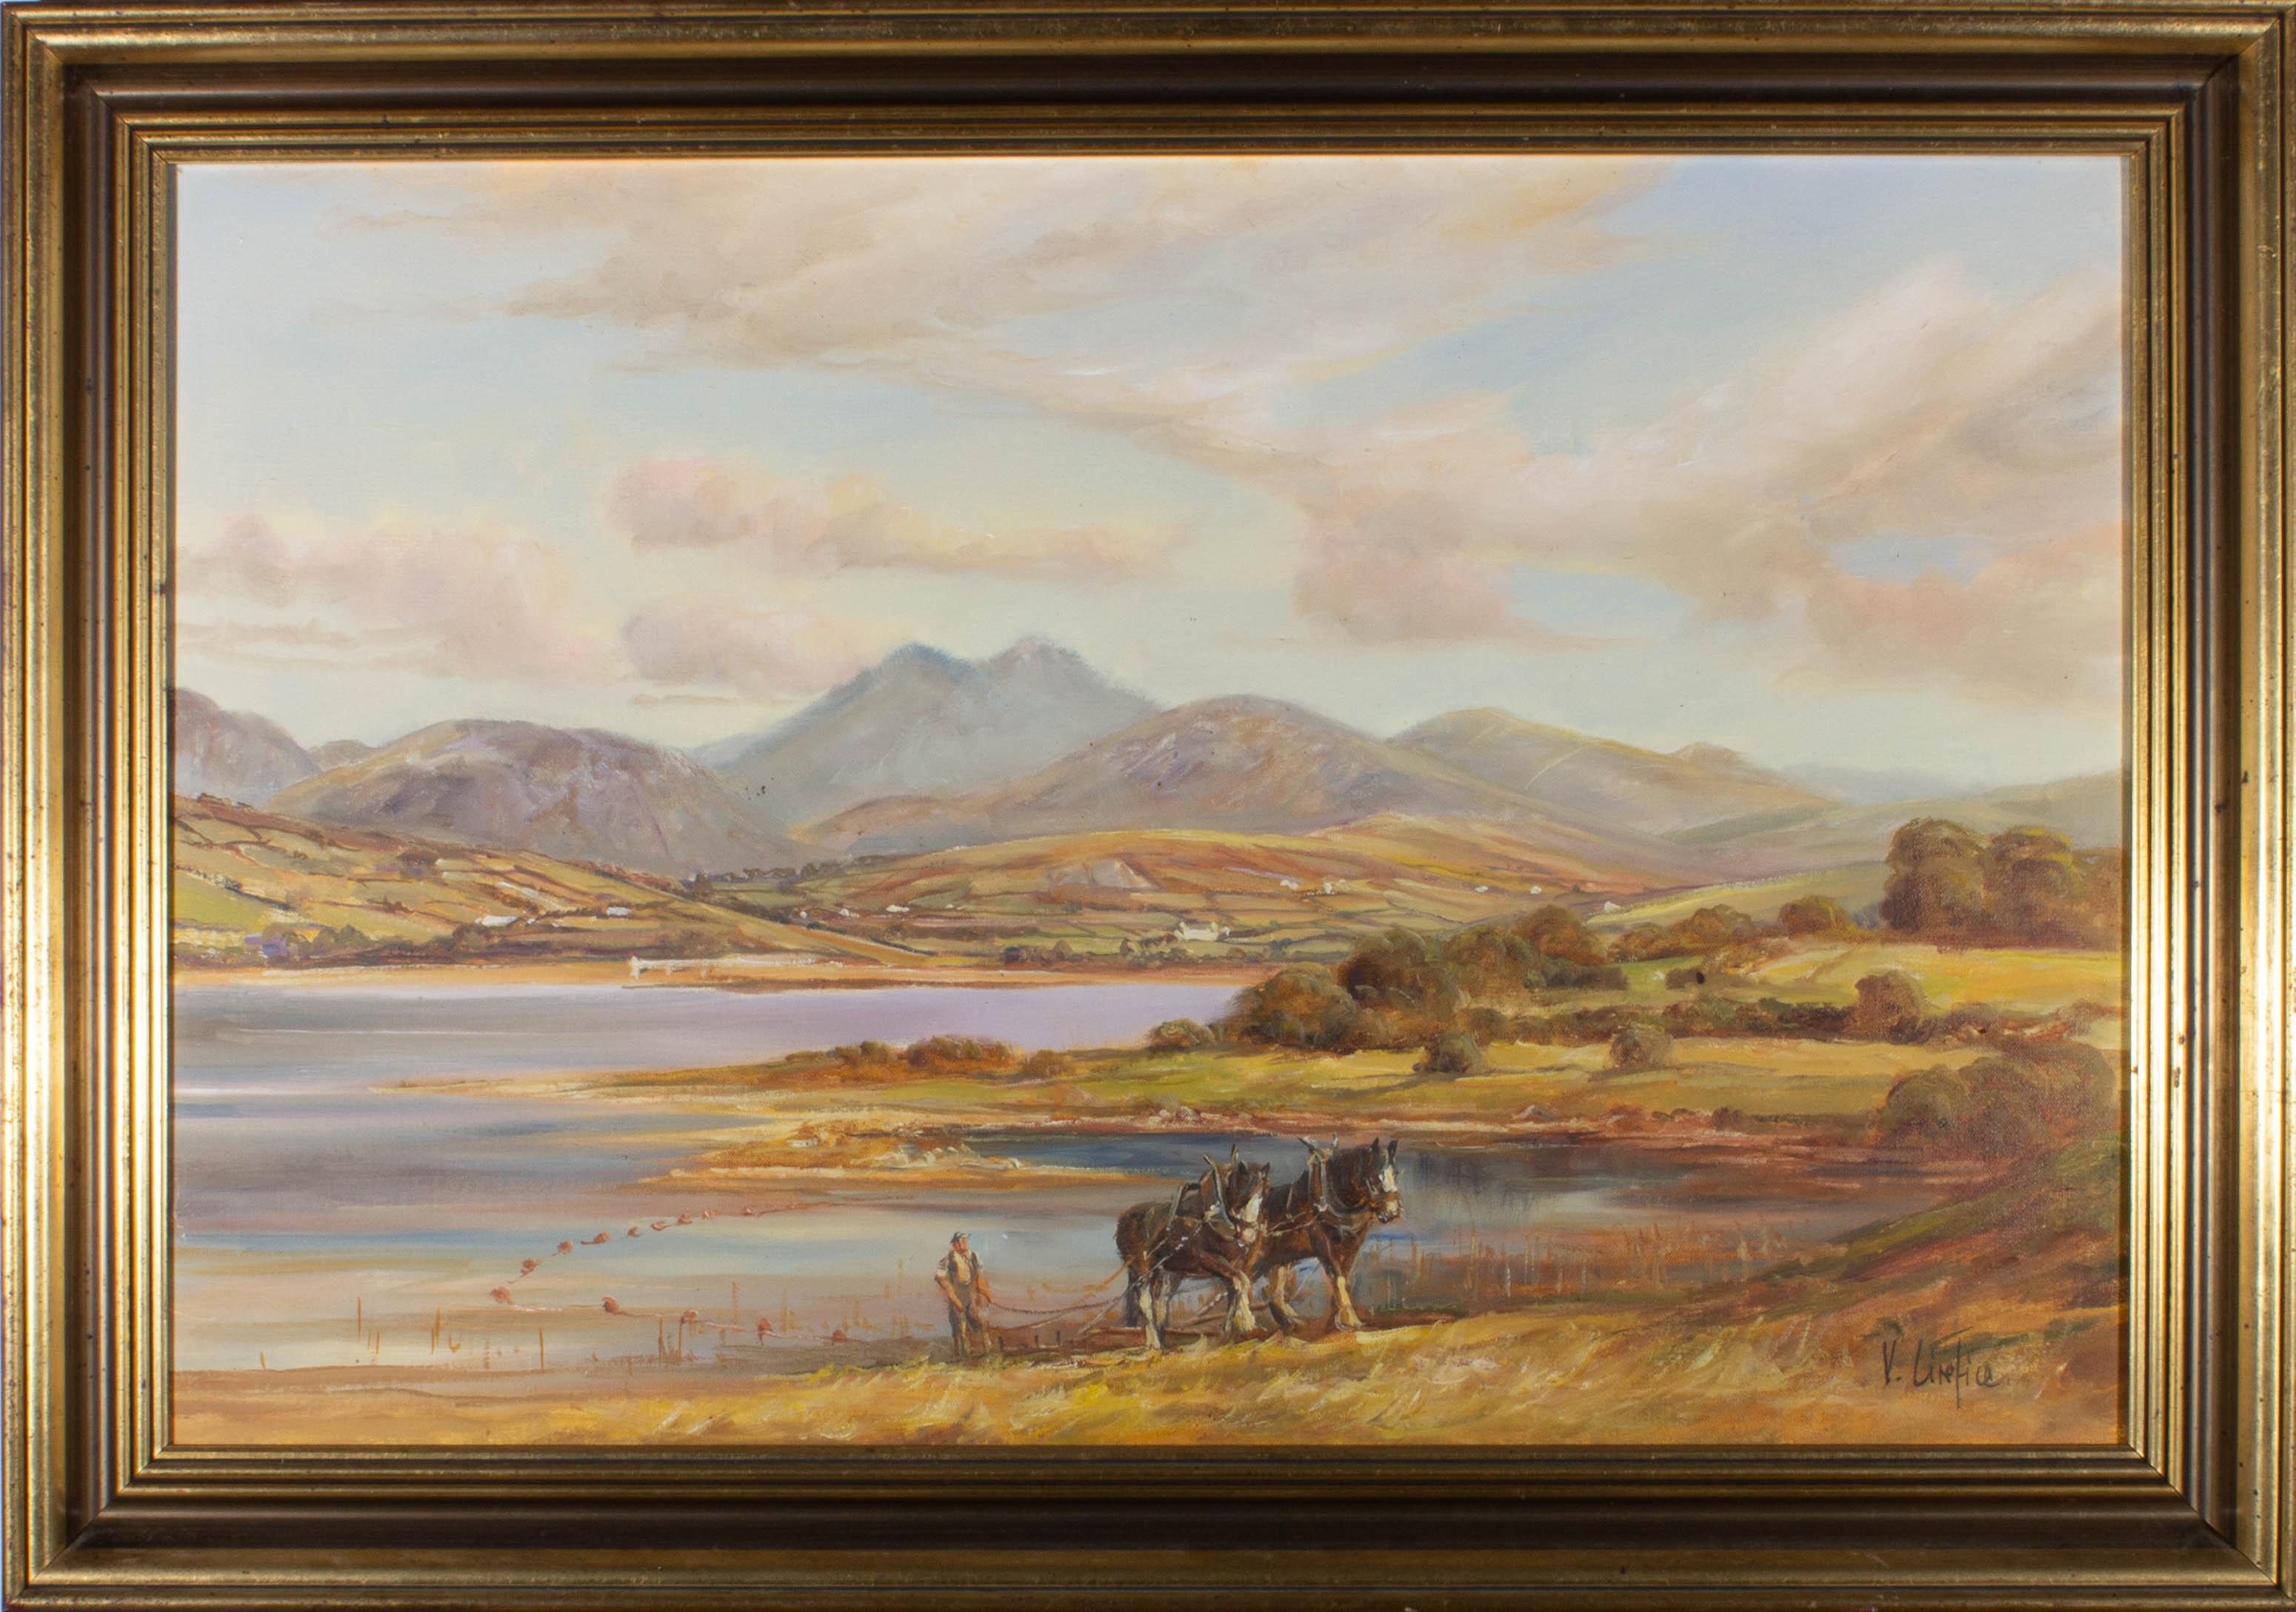 Depicting two plough horses working the field against a vast background of scenic mountains and lakes. Painted in a warm palette, the artist has used stunning detail to capture the Mournes landscape in Northern Ireland. Signed to the lower right.